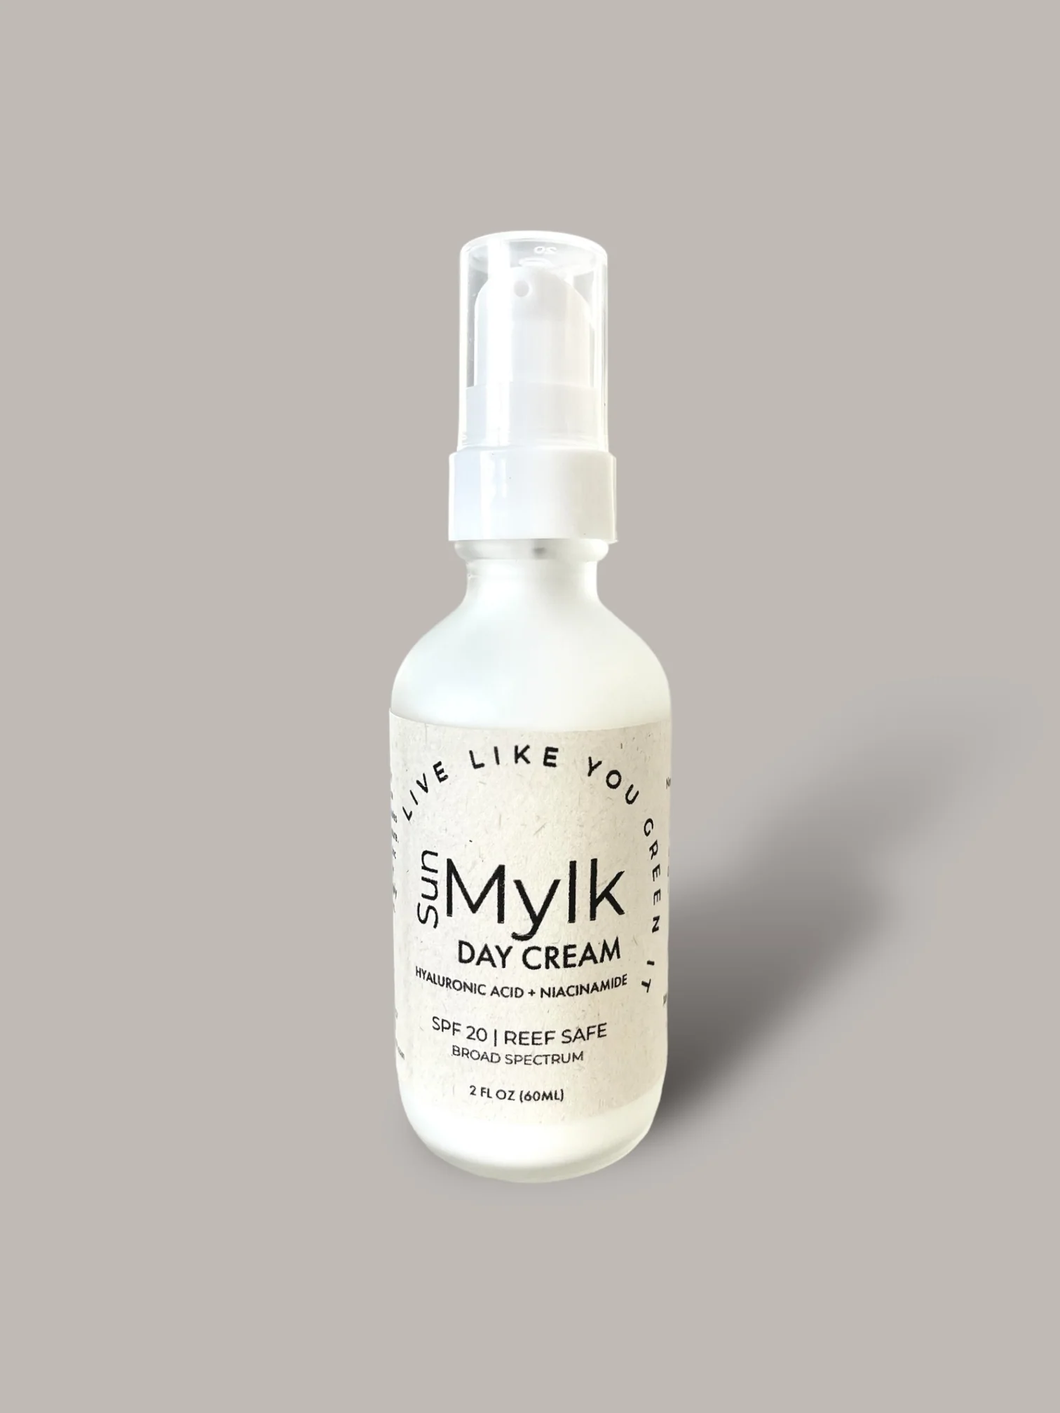 LIVE LIKE YOU GREEN IT | Sun Mylk Day Cream - BULK by oz (container NOT included)